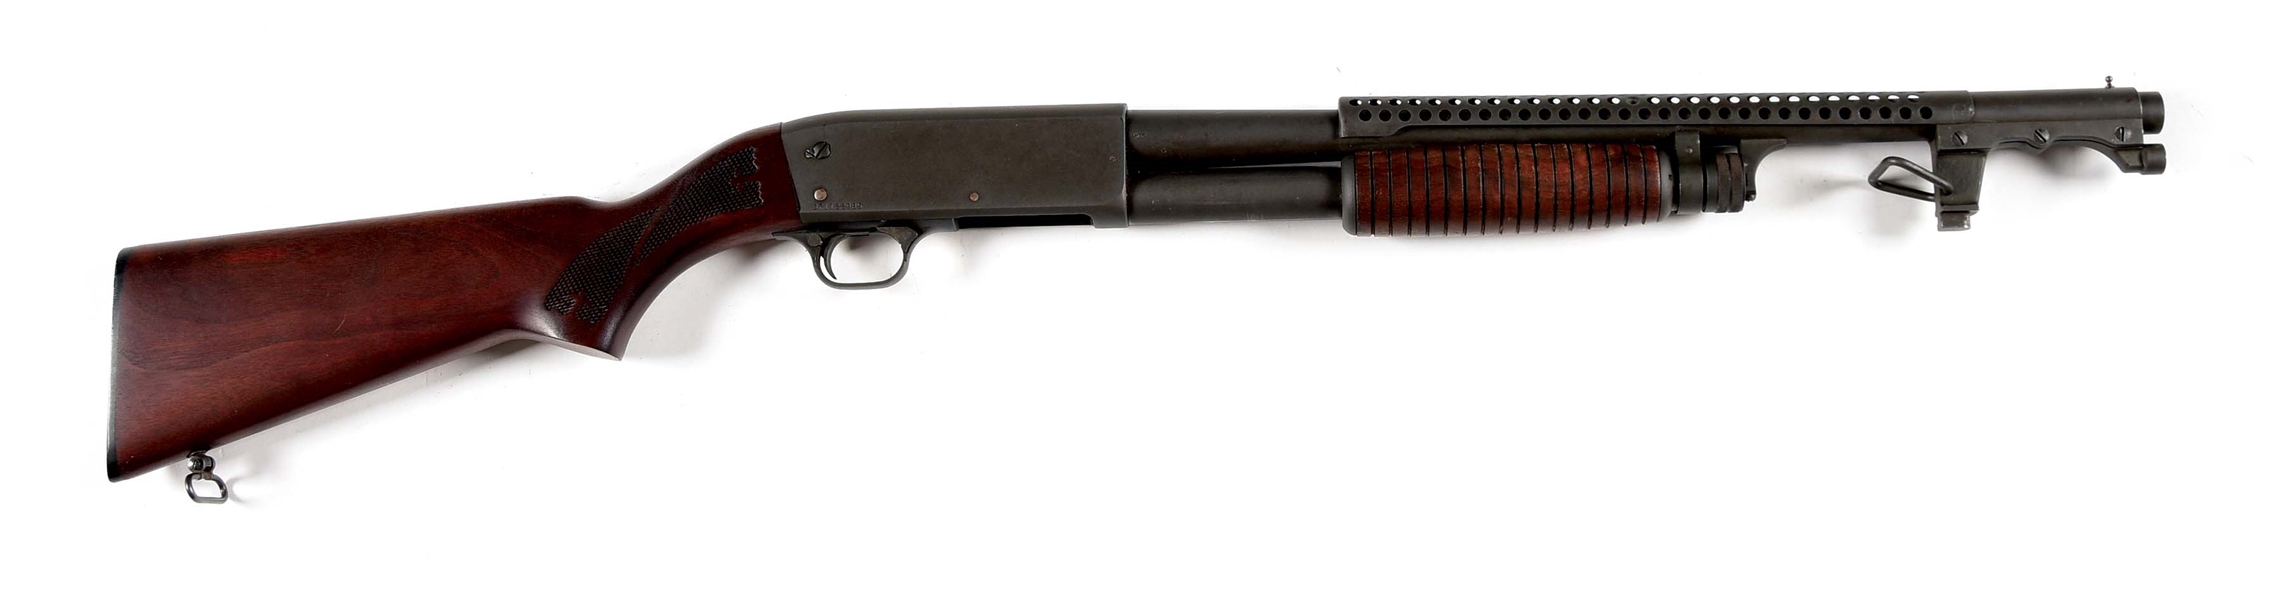 (M) ITHACA MODEL 37 TRENCH SHOTGUN MADE IN 1970.